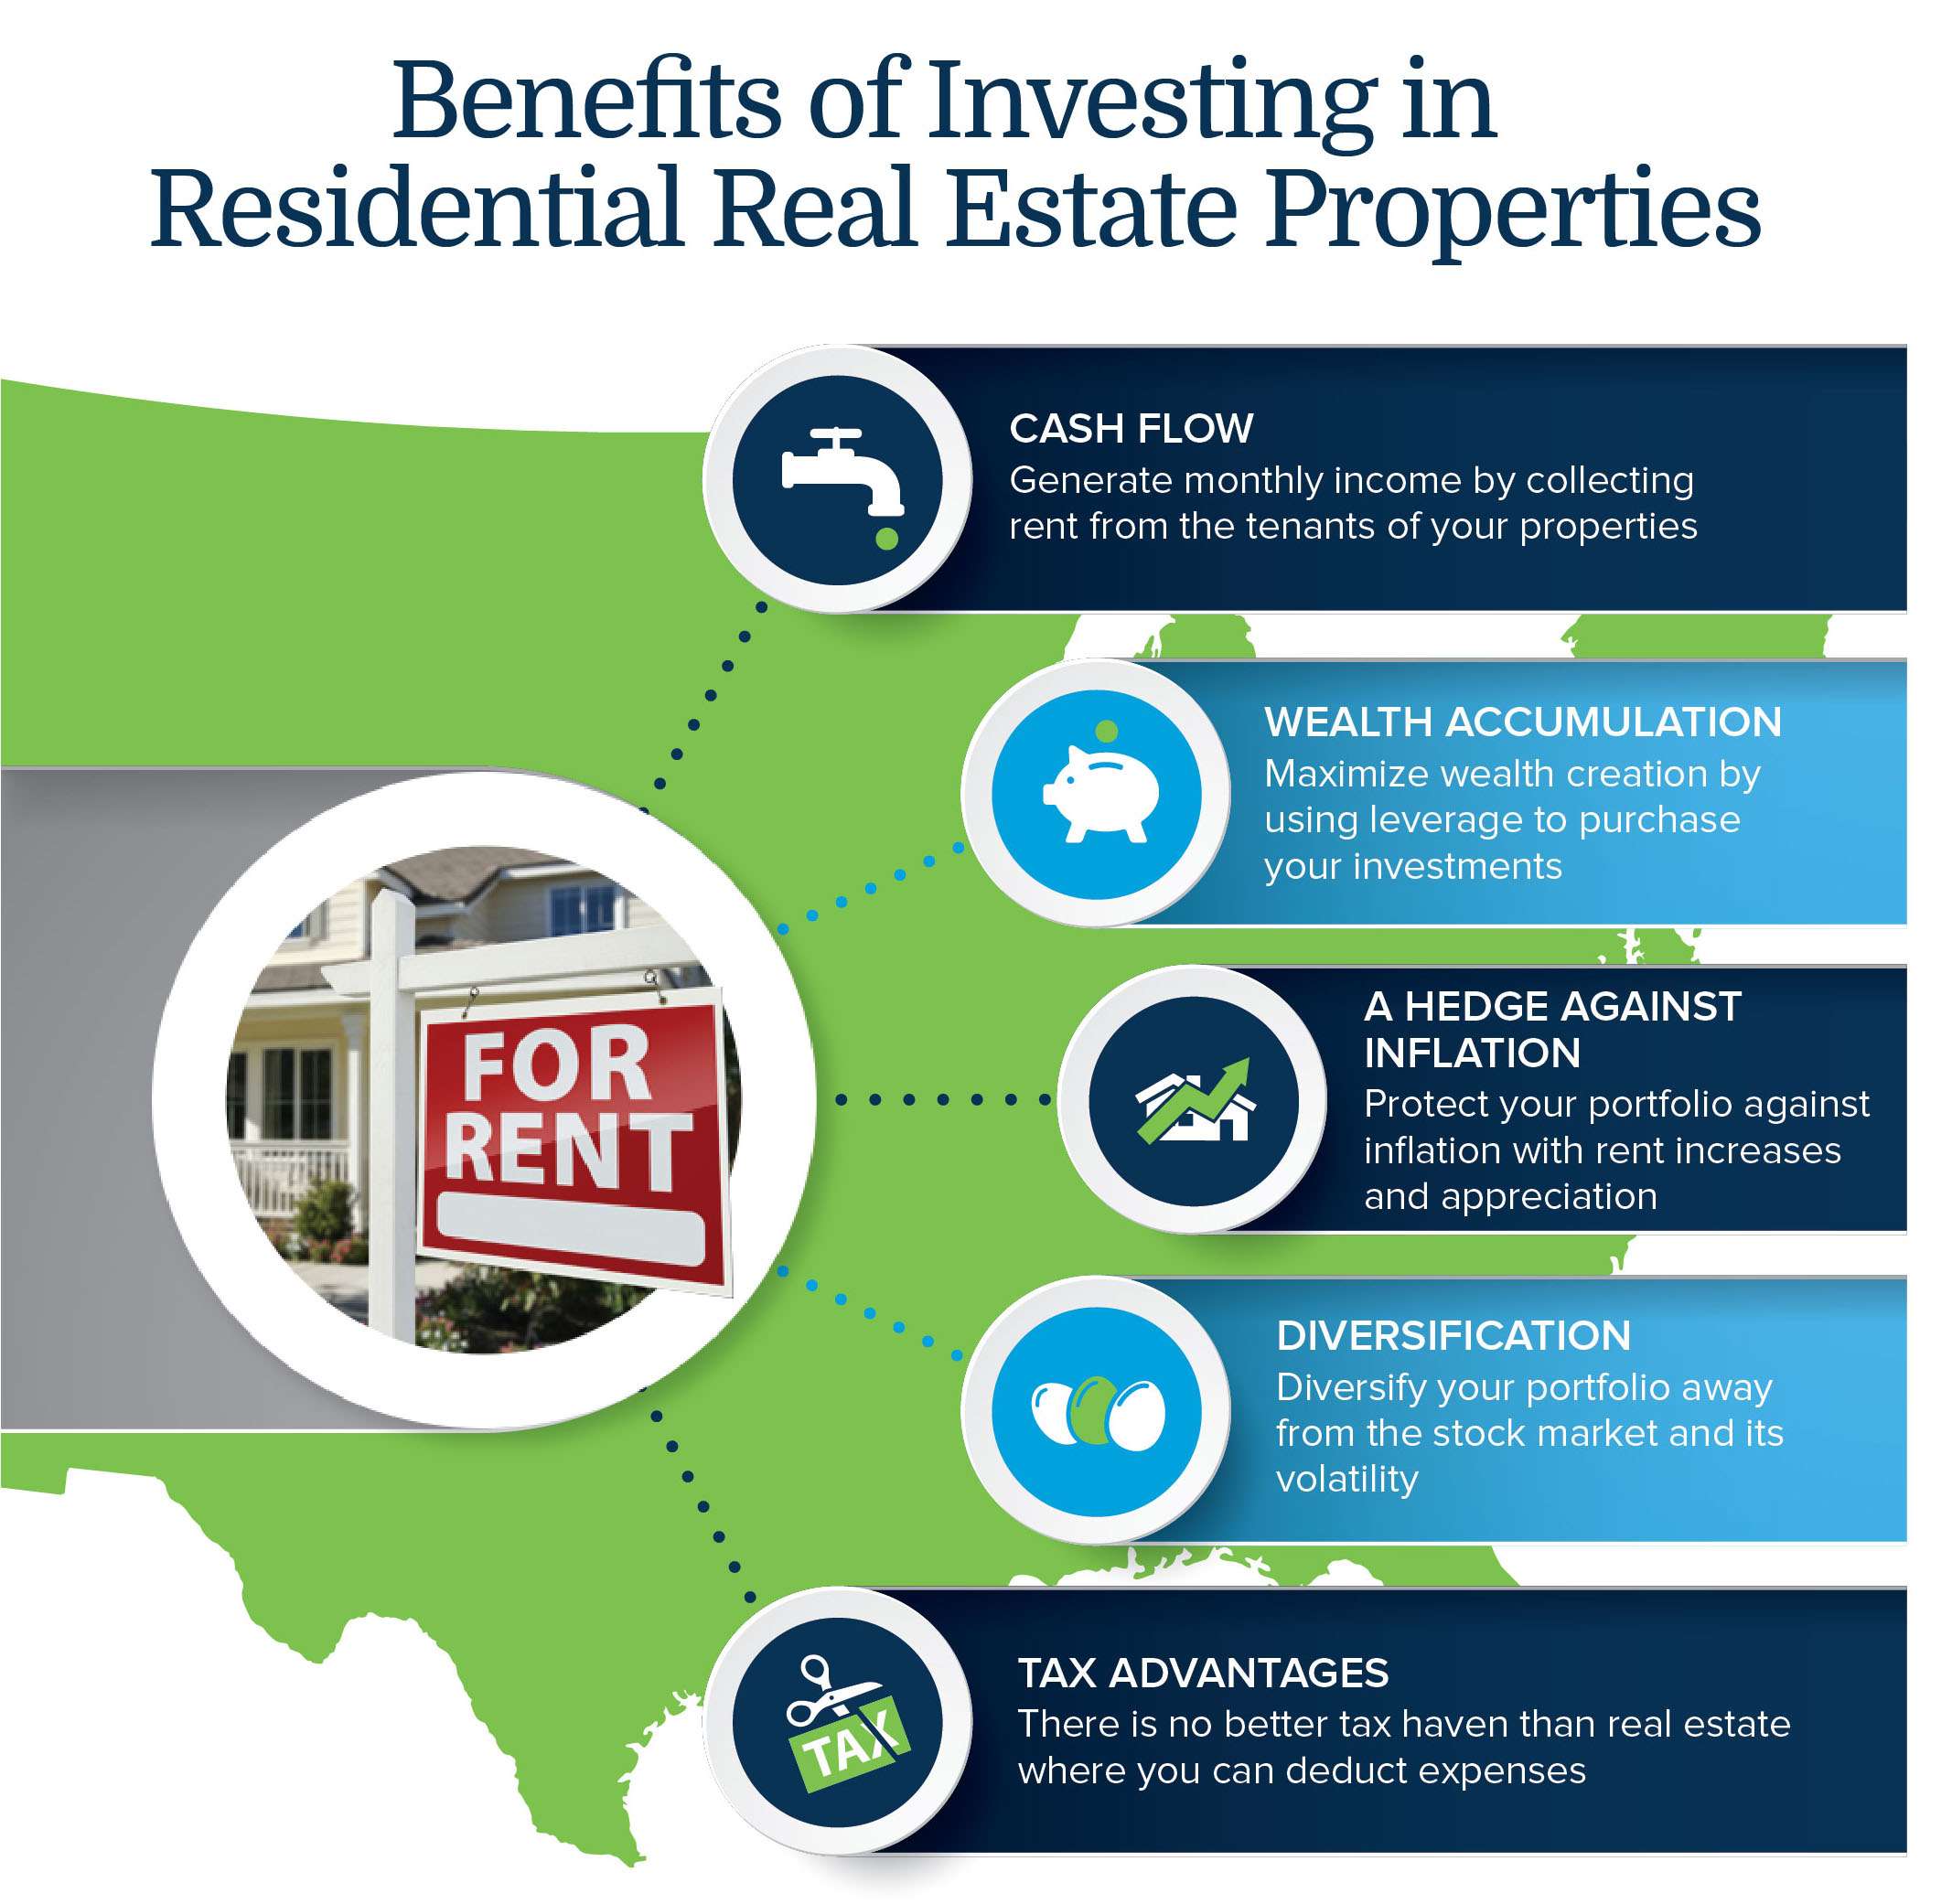 Why Real Estate is #1 When it Comes to Investing